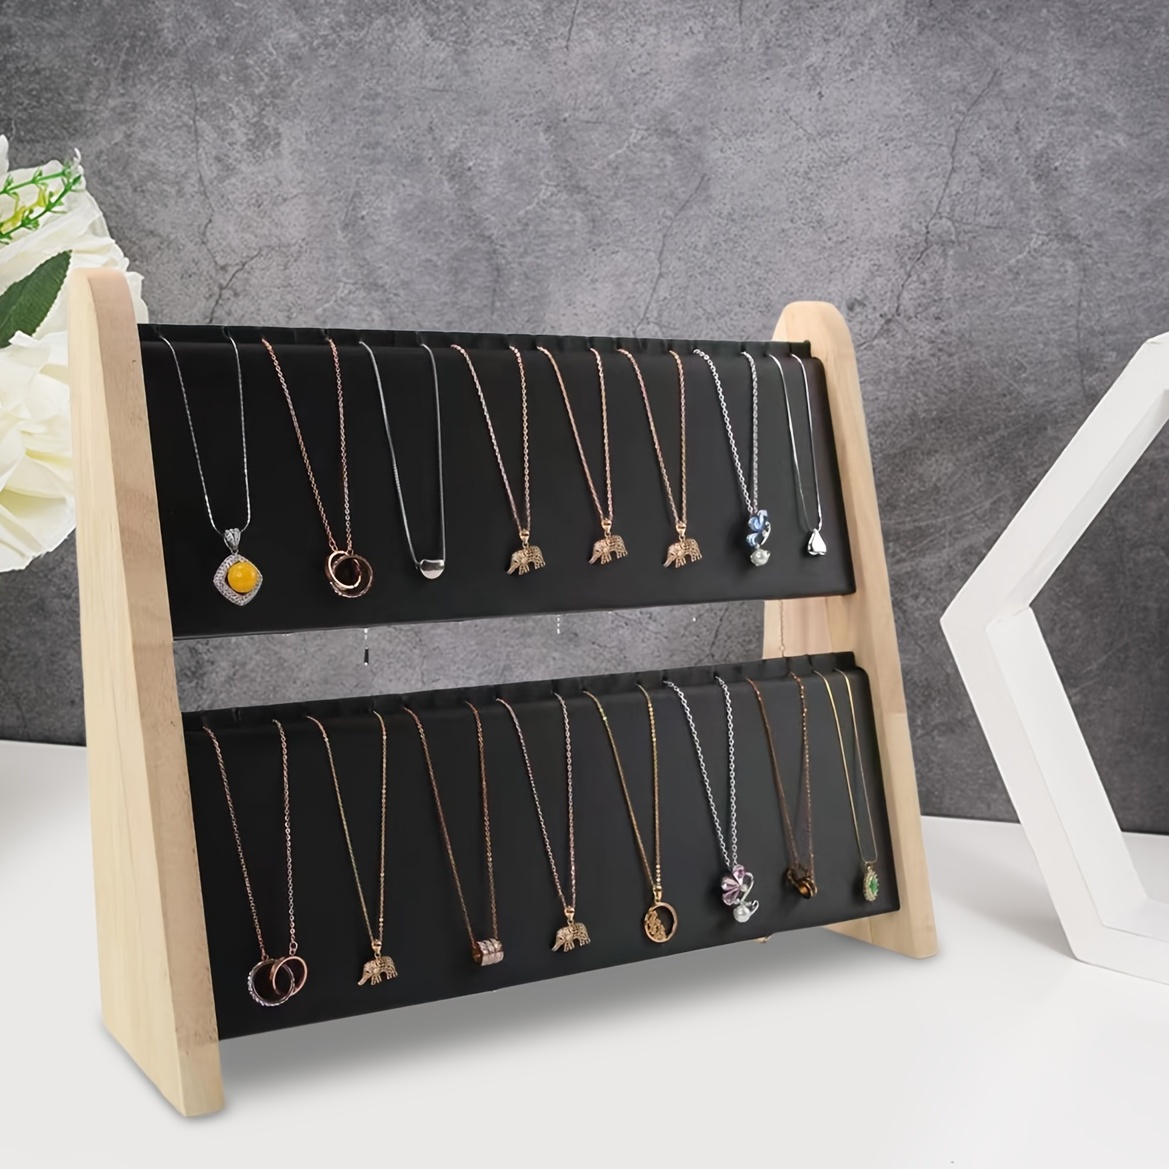 Codant 14 inch Tall Black Velvet Necklace Display Stands for Selling,Tabletop Long Necklace&Earing Display Stands, Foldable 8 Slots Jewelry Display